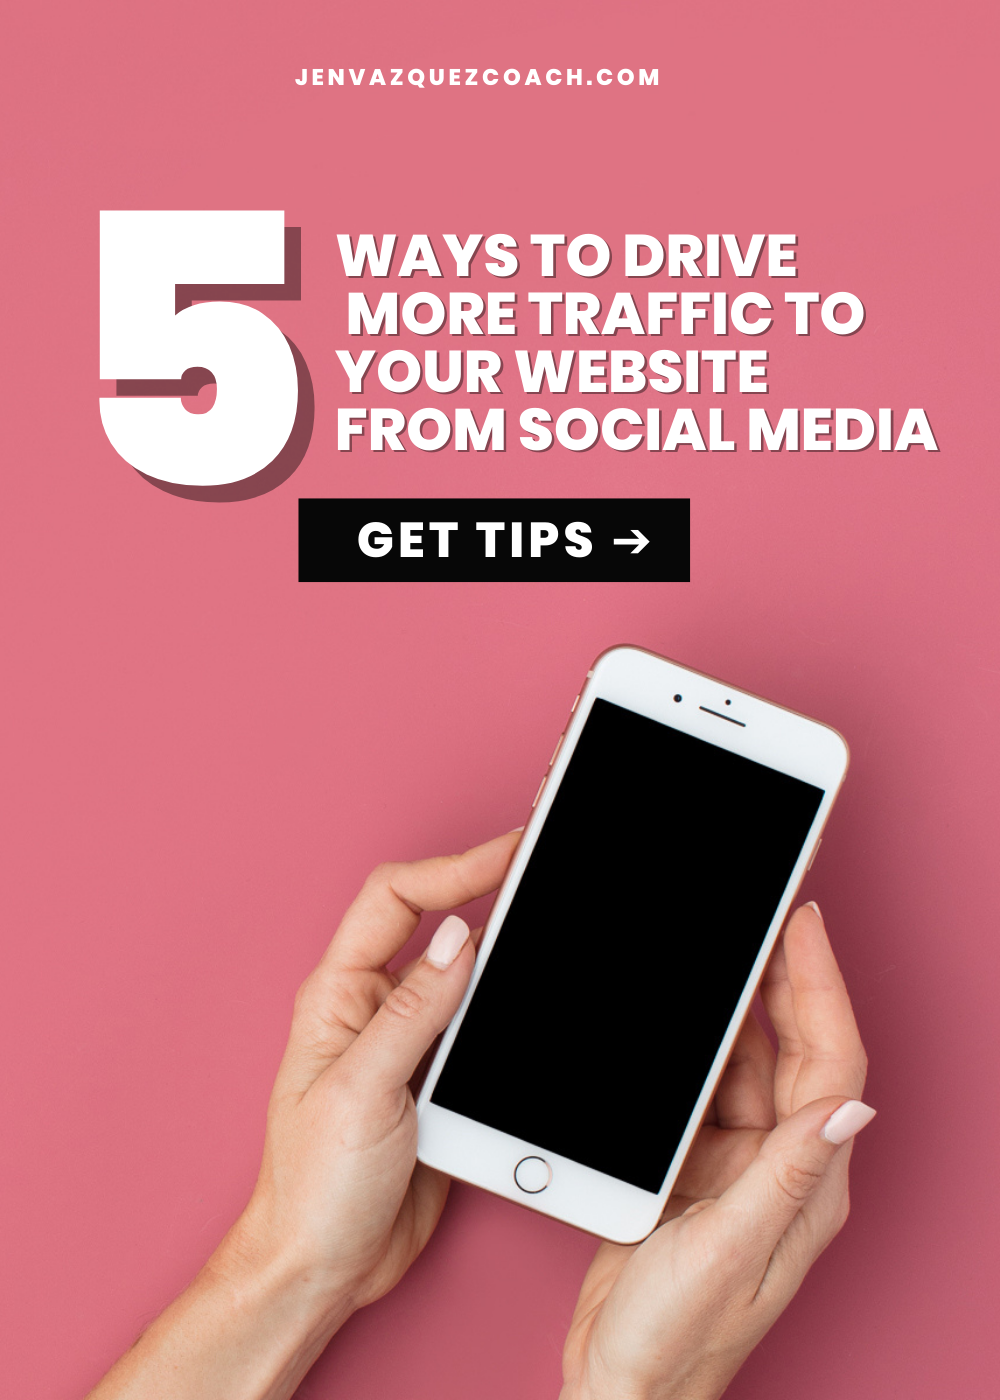 5 Steps To Drive More Traffic To Your Website From Social Media by Jen Vazquez Pinterest Marketing for Wedding Pros